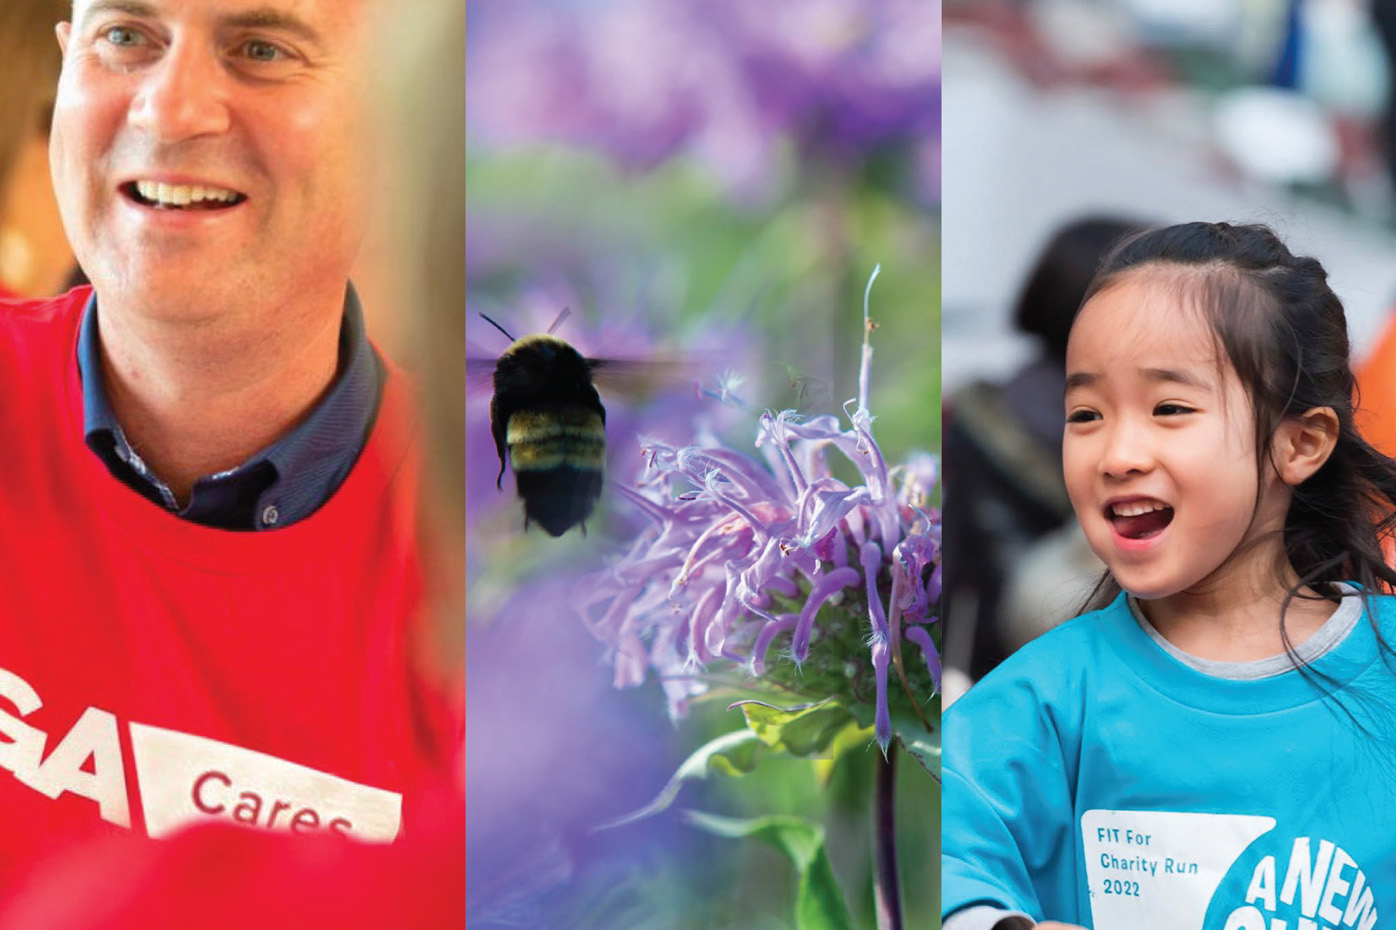 A combination photo of a man in an RGA Cares t-shirt, a bee hovering over a purple flower, and a girl running in a charity run